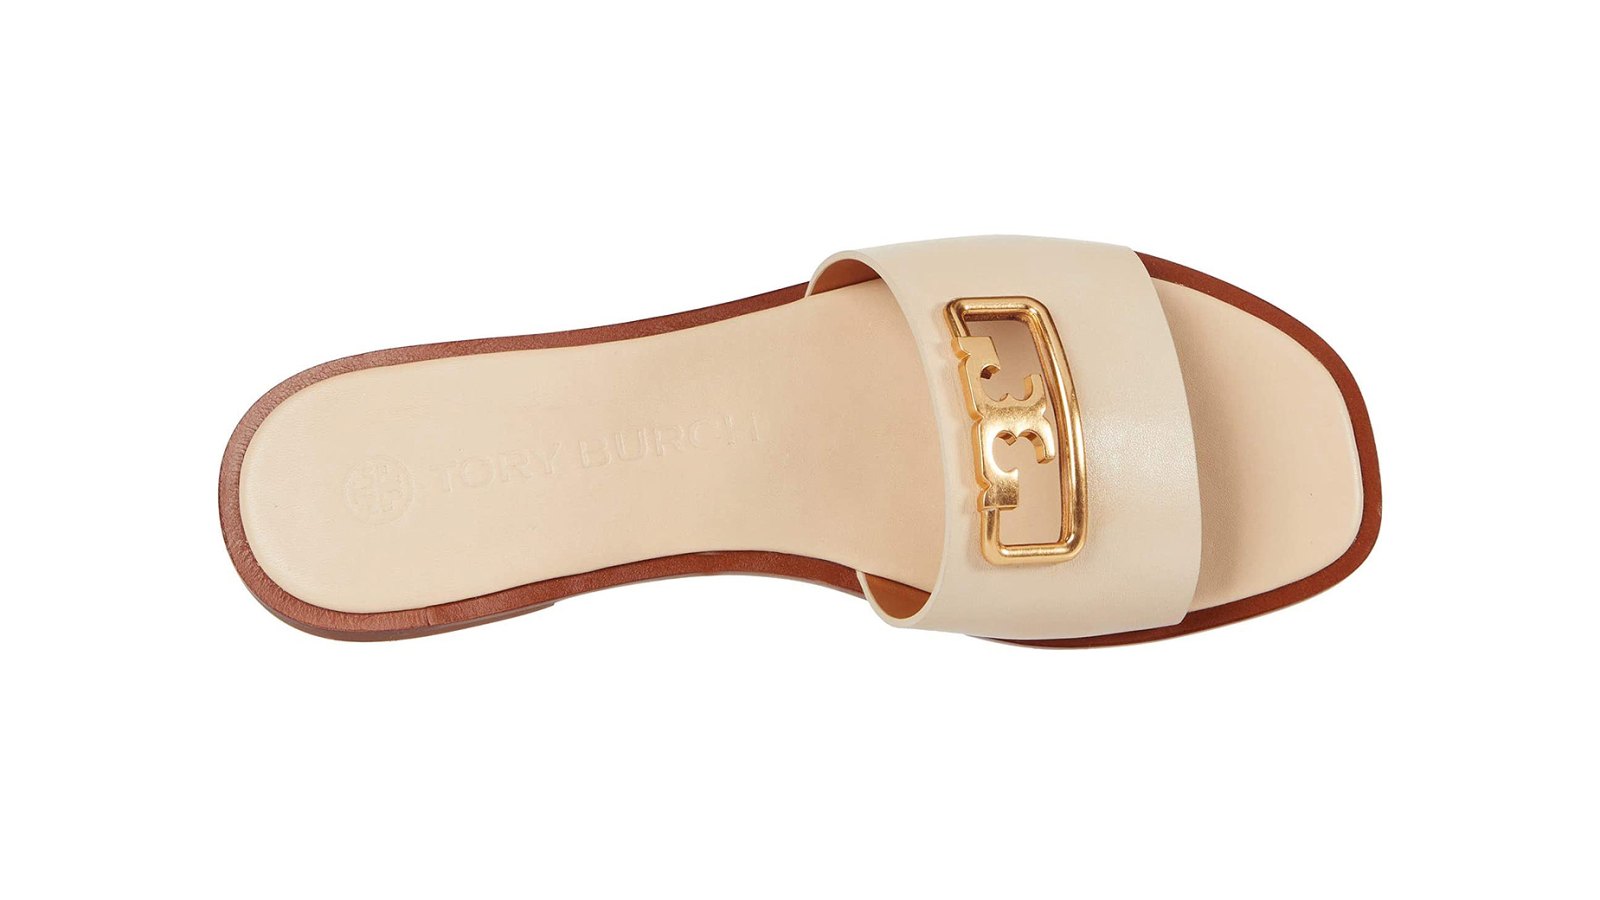 Tory Burch Selby Slide Is Nearly $75 Off at Zappos | Us Weekly